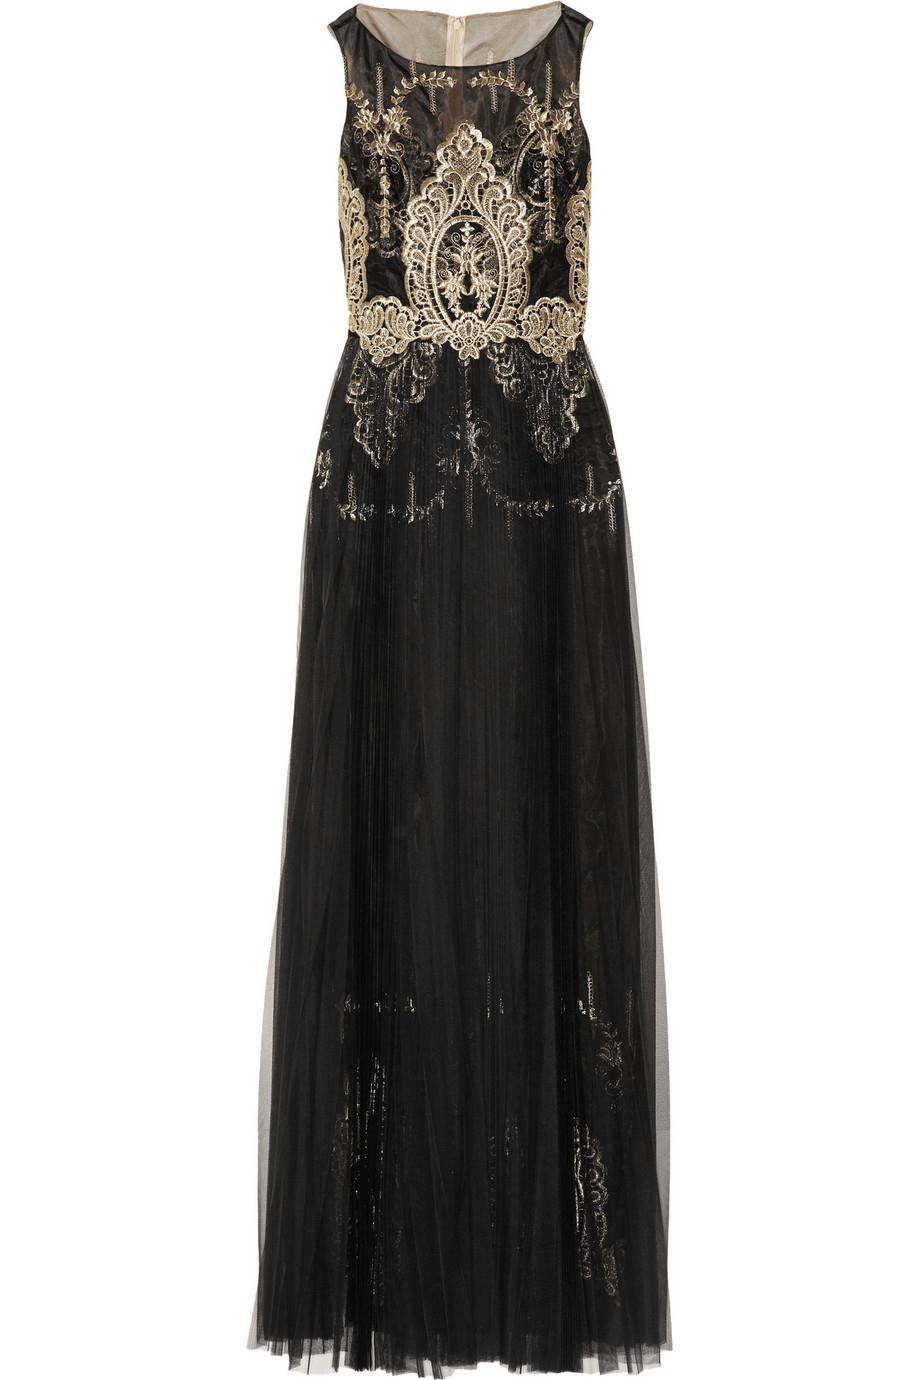 Notte by marchesa Embroidered Organza And Tulle Gown in Black | Lyst